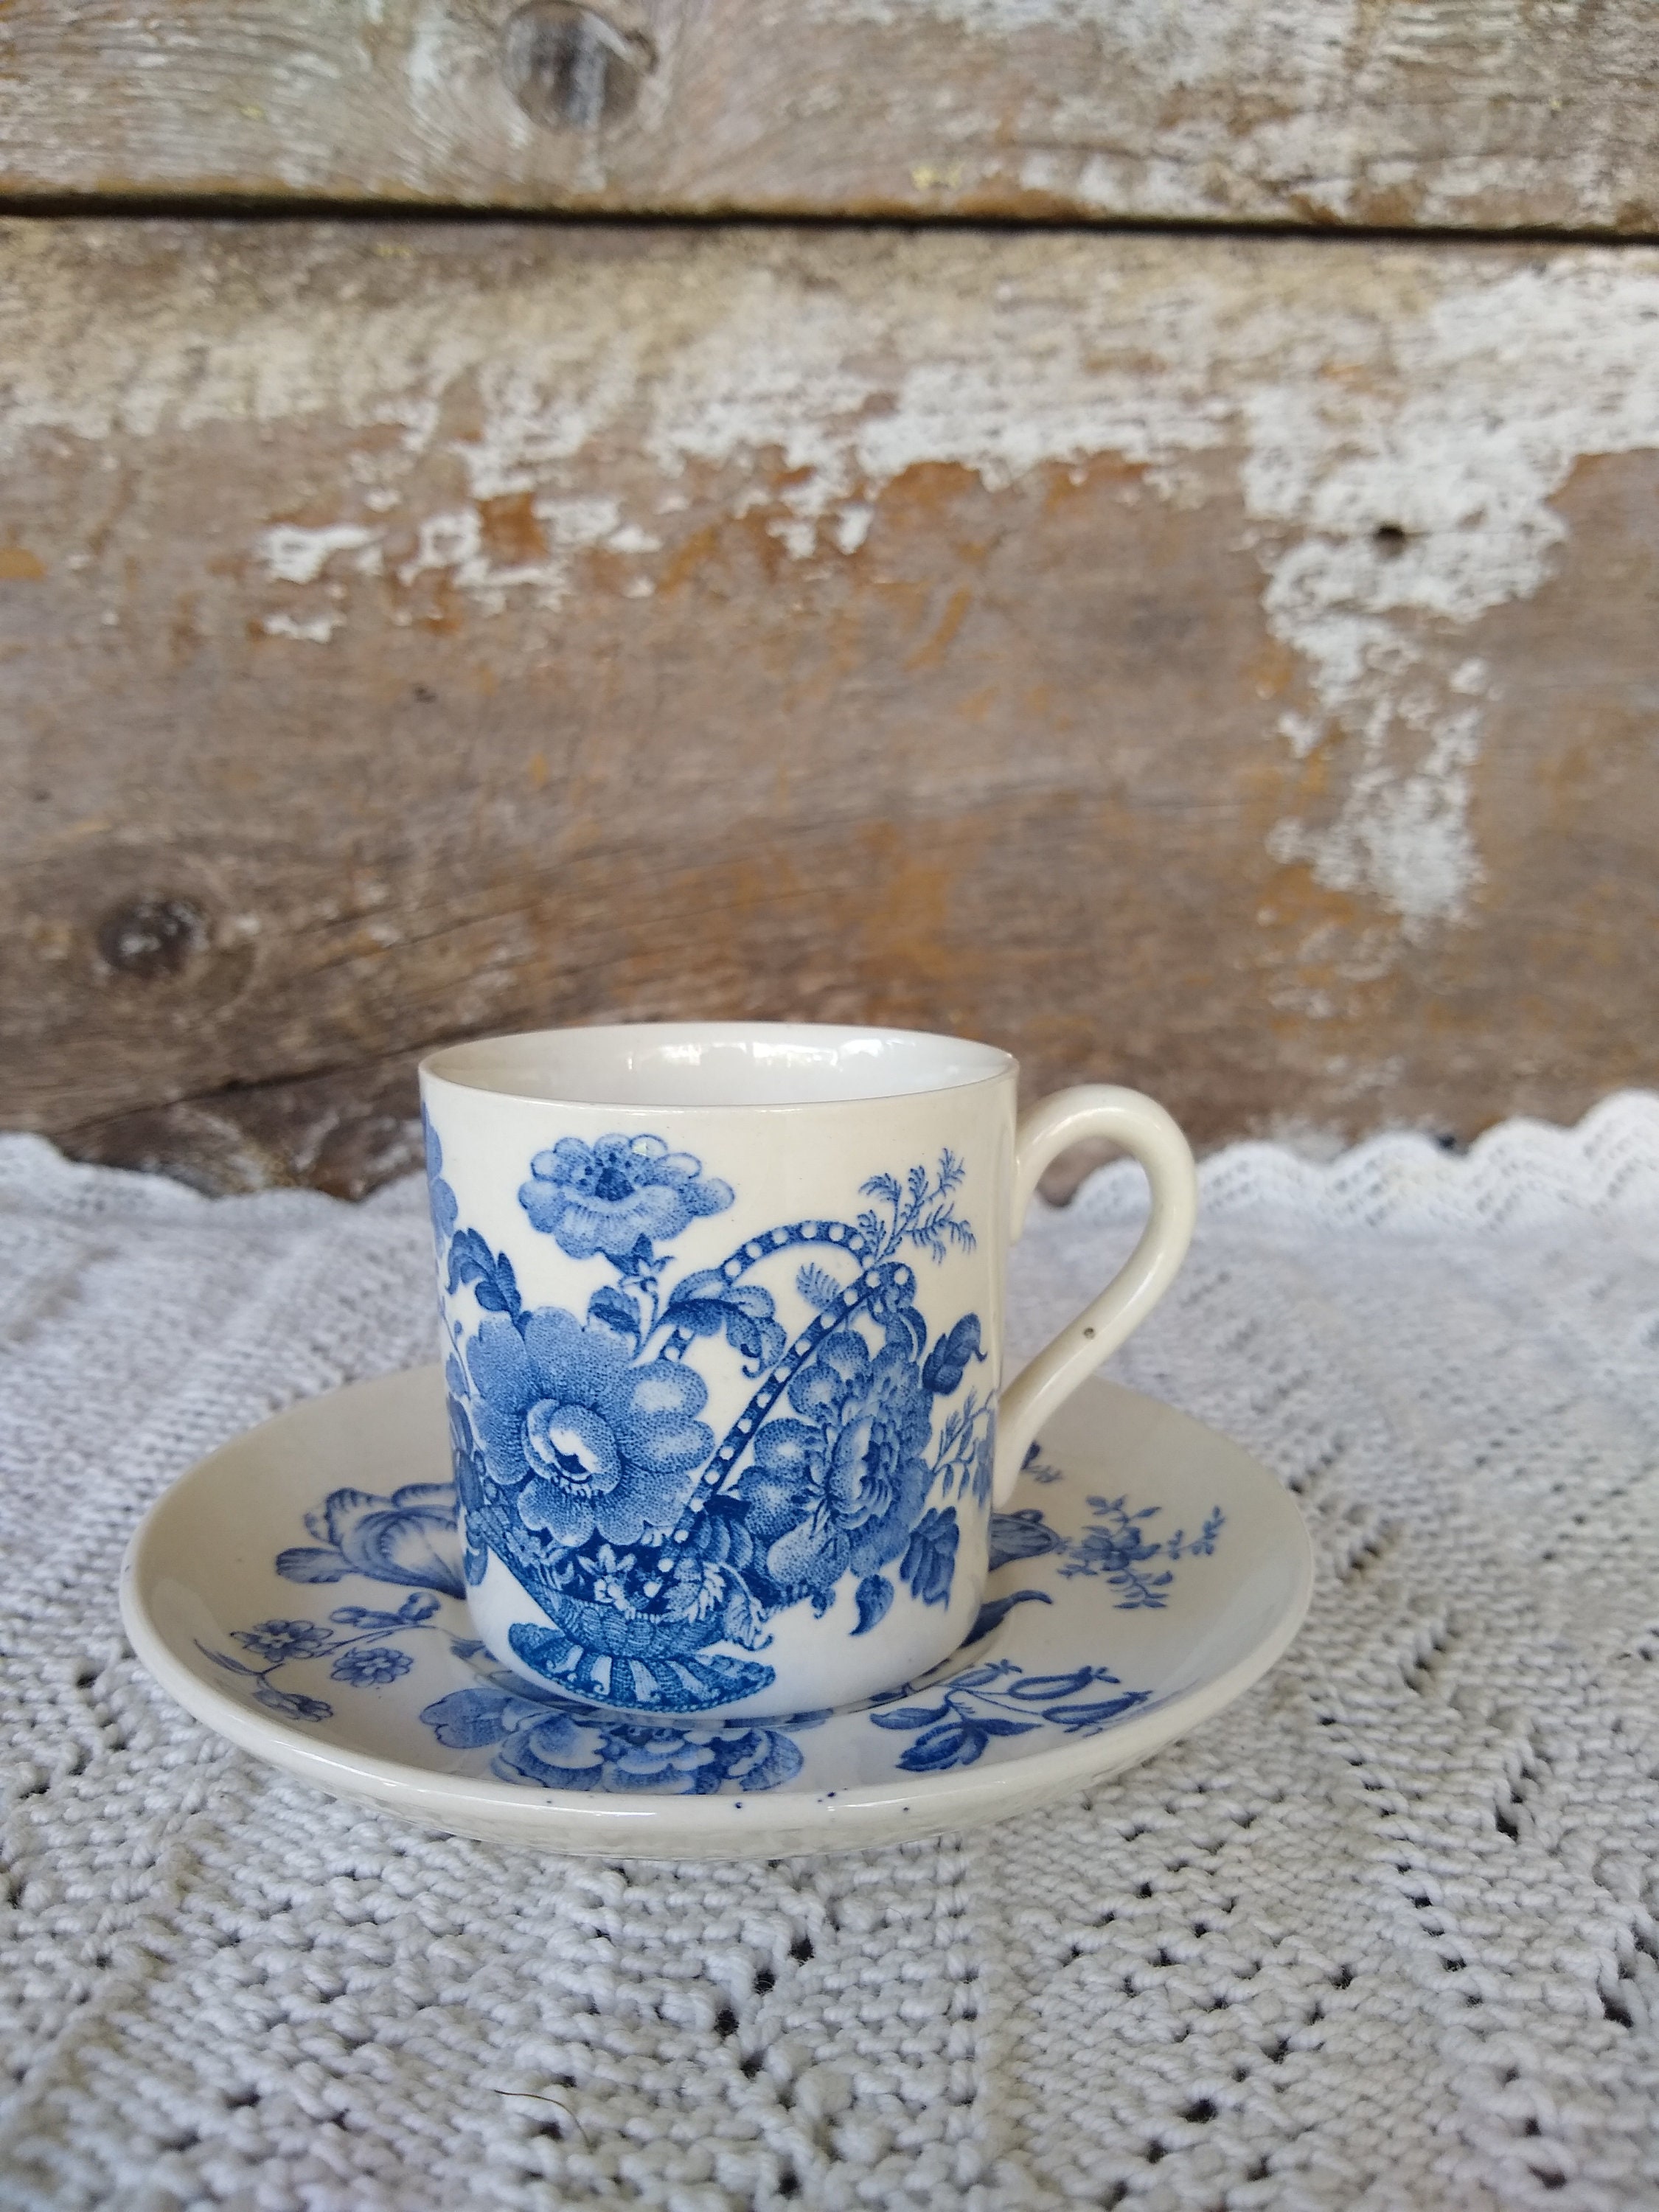 Blue White Demitasse Cups Saucers, Set of 3 Antique English John Maddock Demitasse  Cups Saucers Blue Floral, DIY Project, Sold as Set